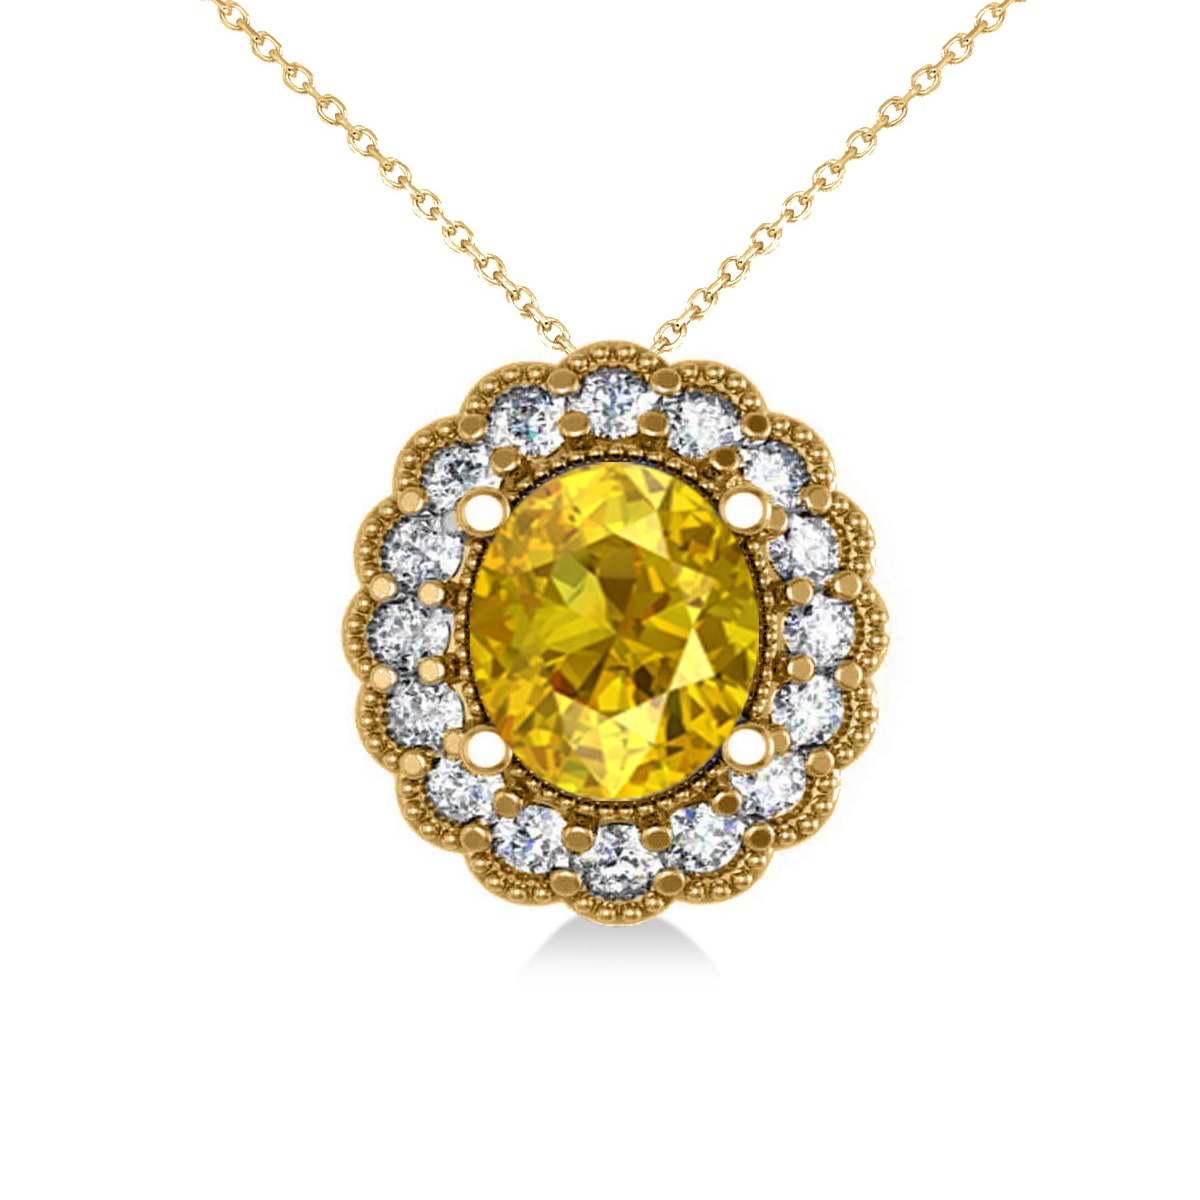 Yellow Sapphire & Diamond Floral Oval Pendant Necklace 14k Yellow Gold (2.98ct)